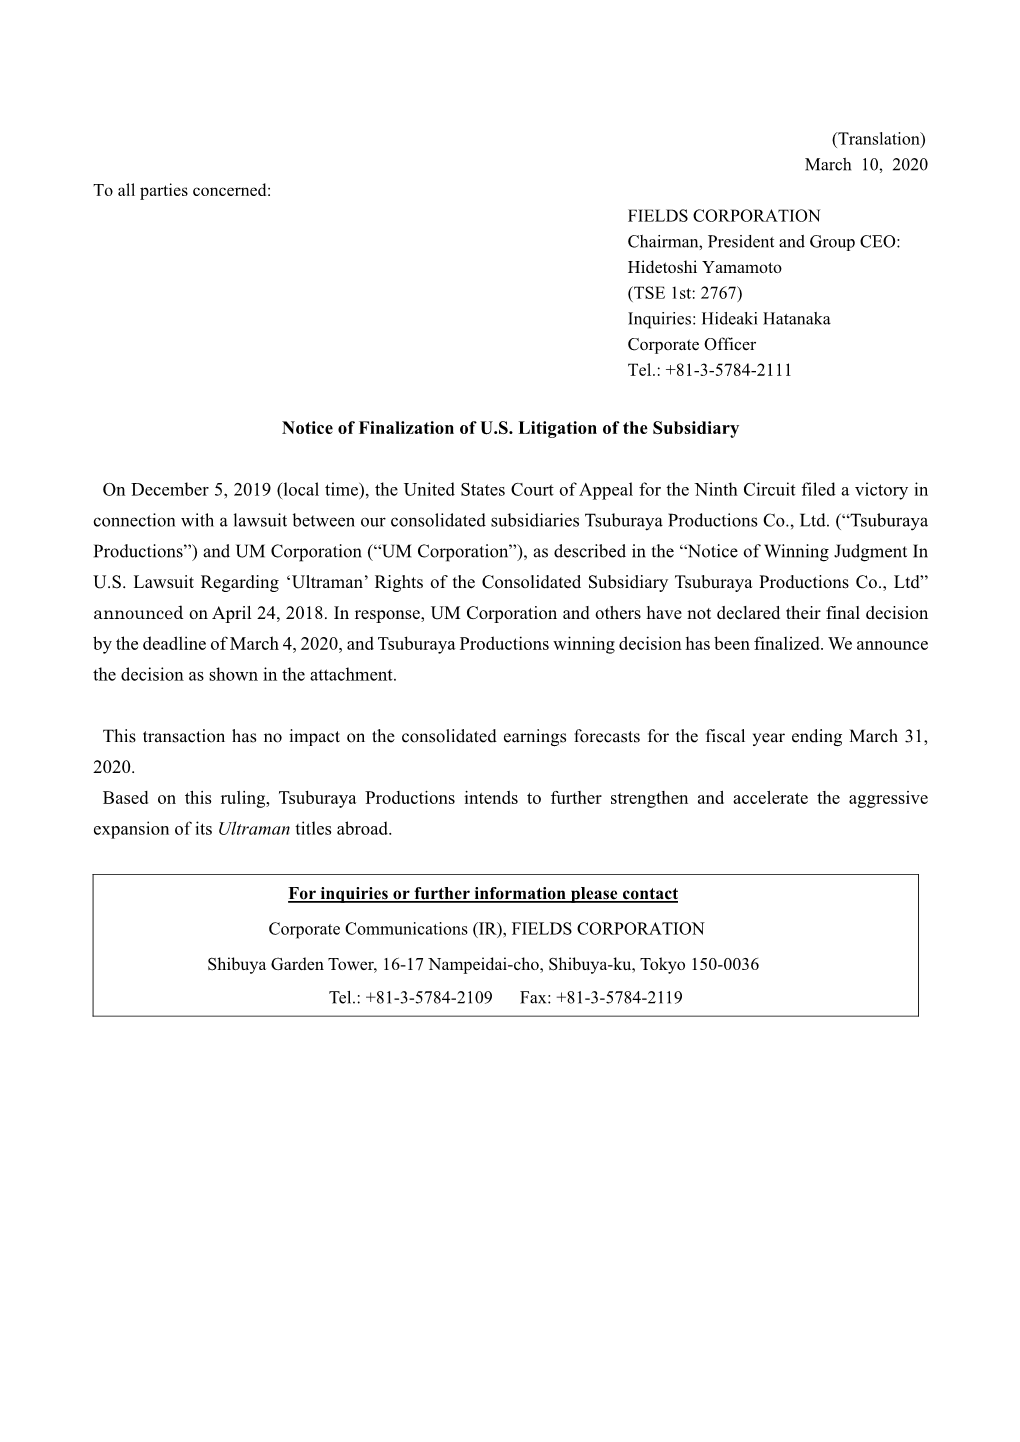 Notice of Finalization of U.S. Litigation of the Subsidiary on December 5